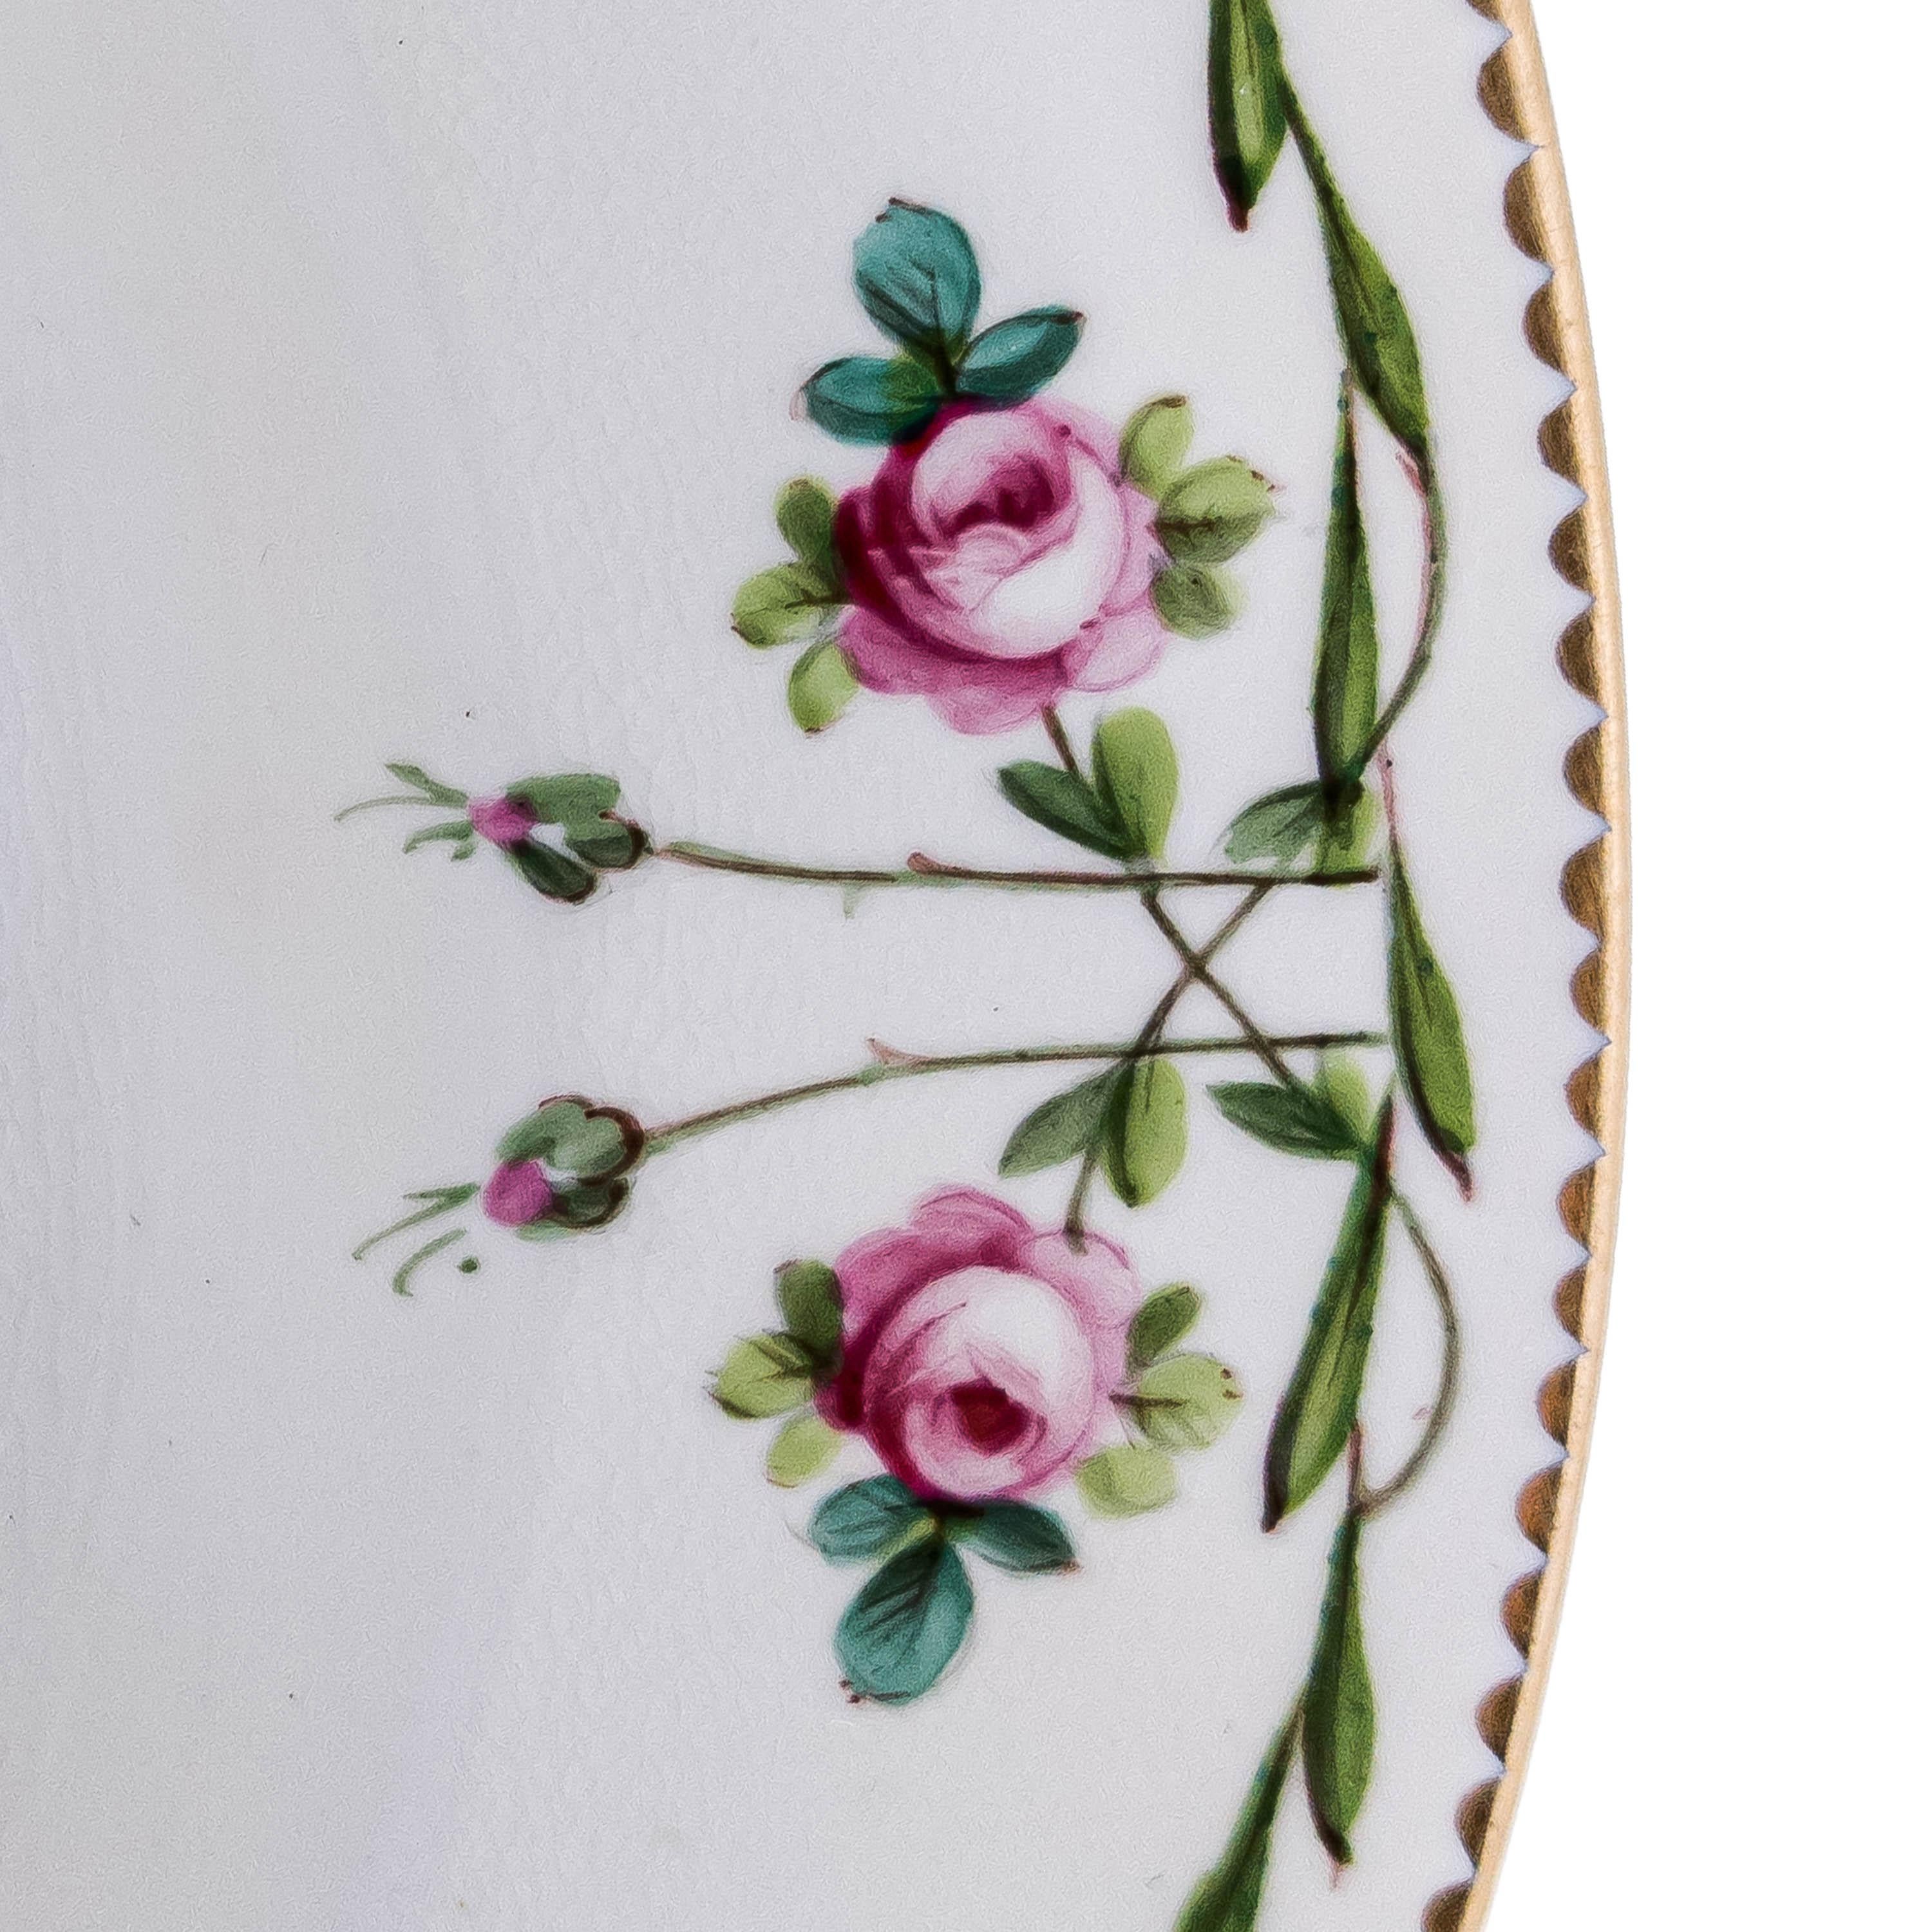 Early Victorian 10 Elegant Antique English Dessert or Salad Plates, Hand Painted Details